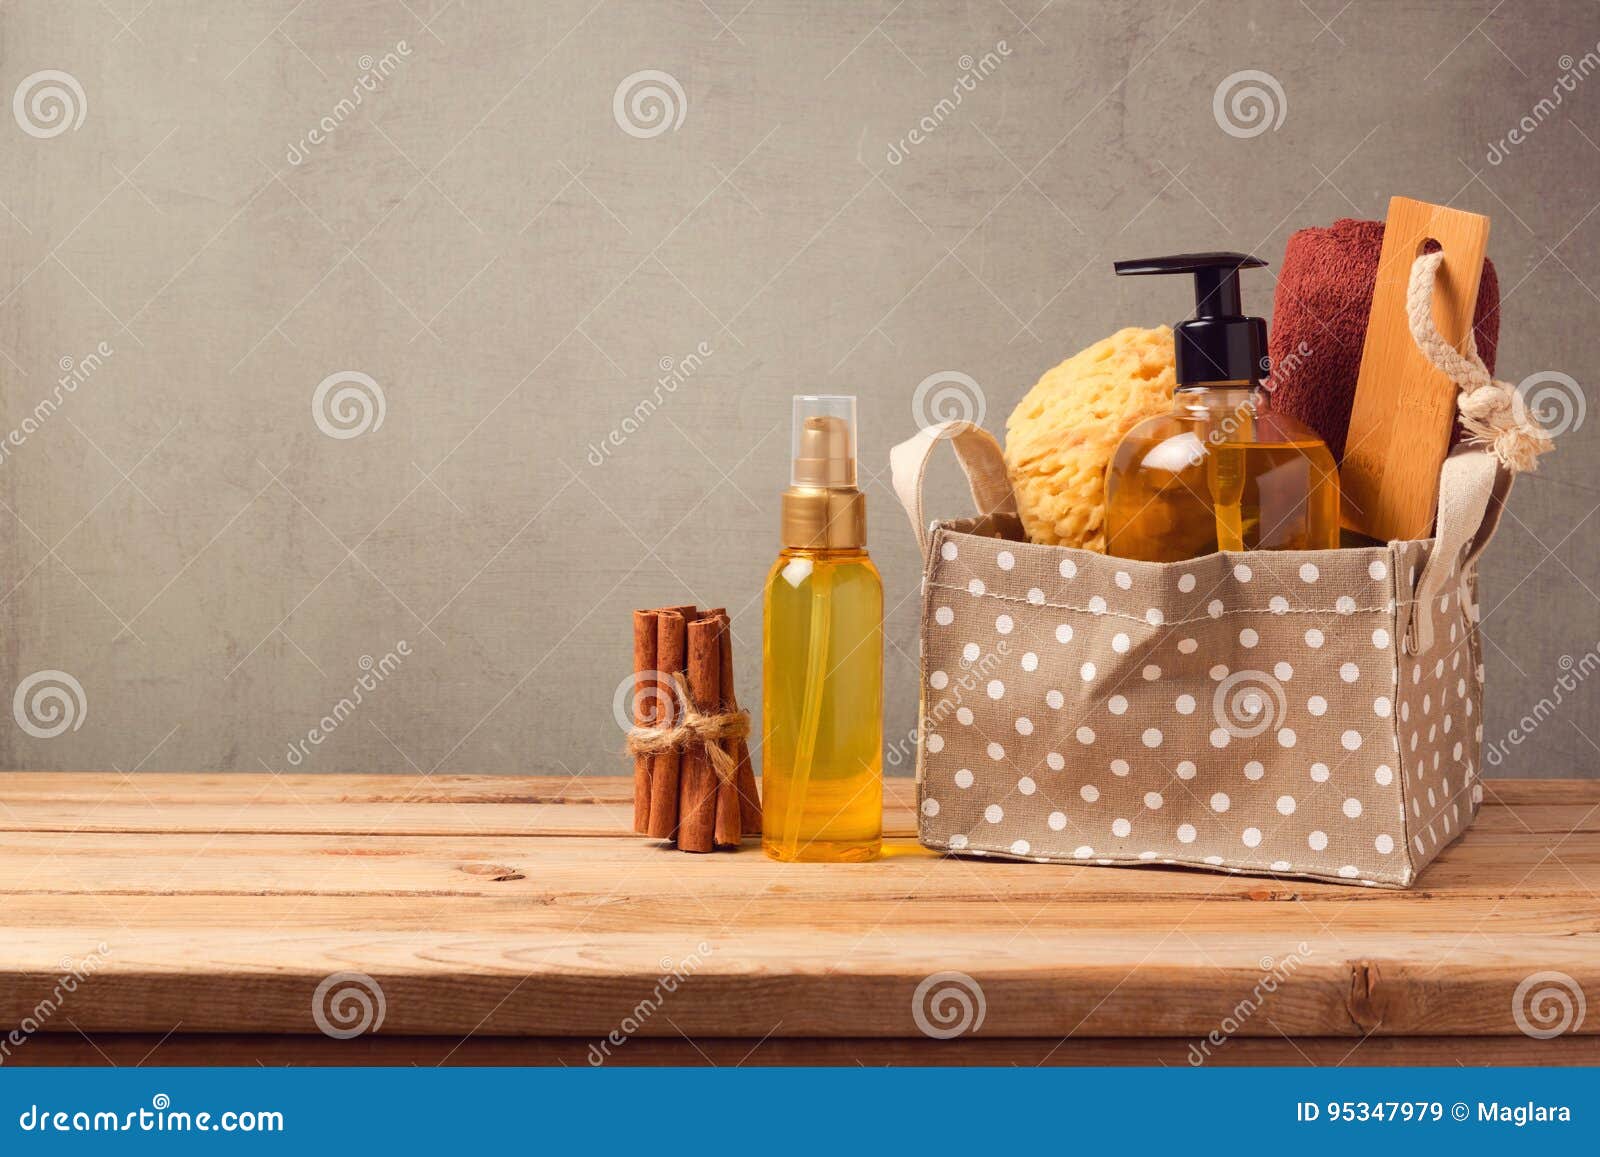 body care and personal hygiene products on wooden table